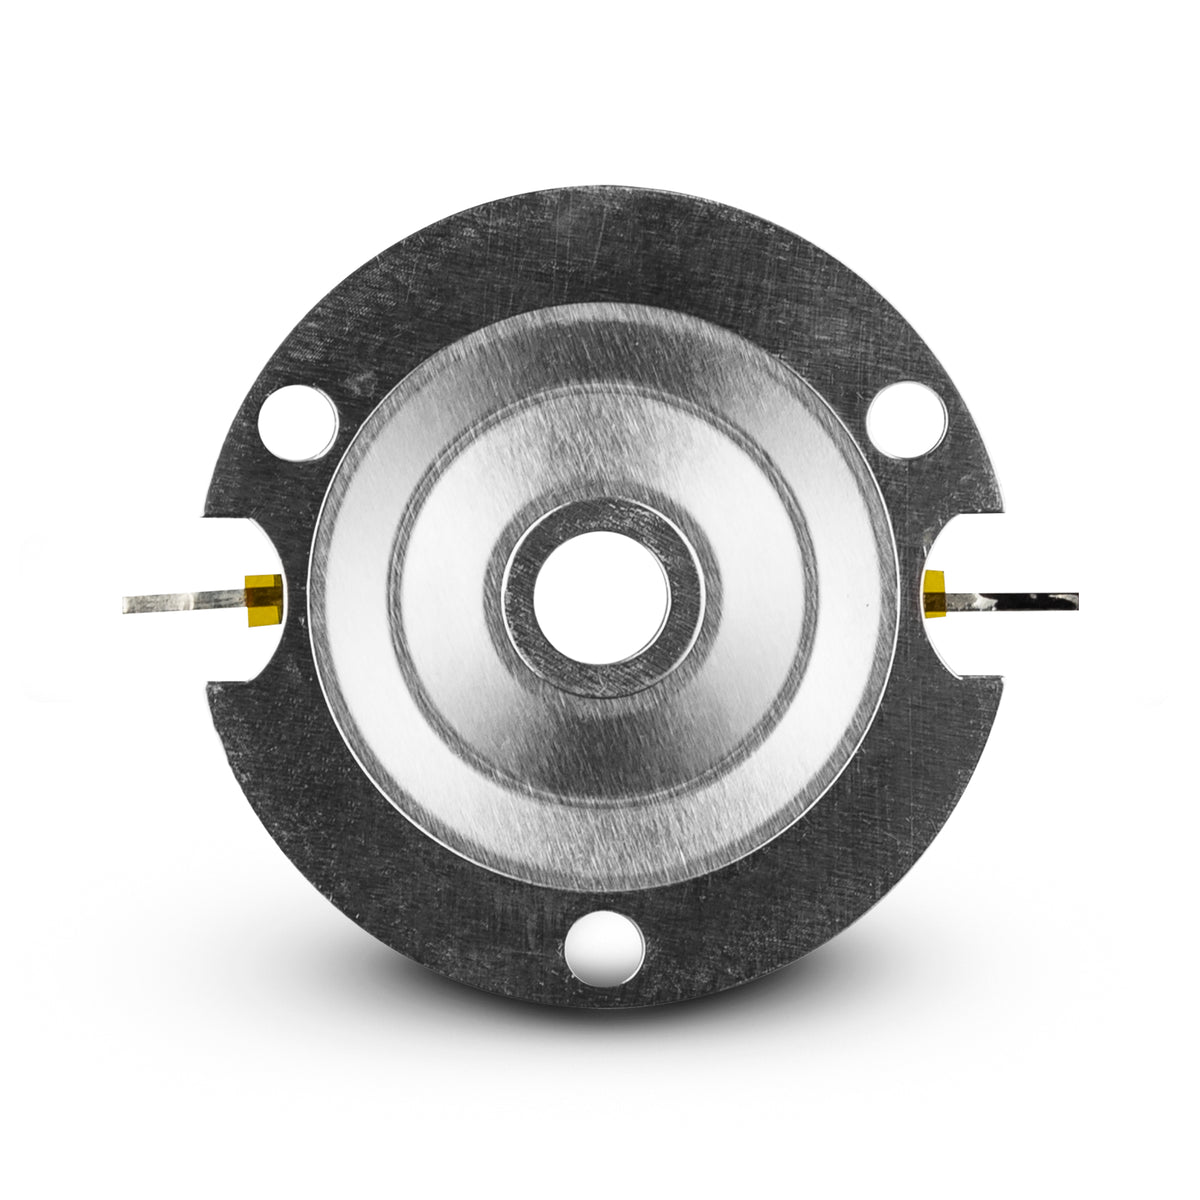 PRO Replacement Diaphragm for PRO-HY6.4B, PRO-HY8.4B, PRO-HY69.4B DRIVERS